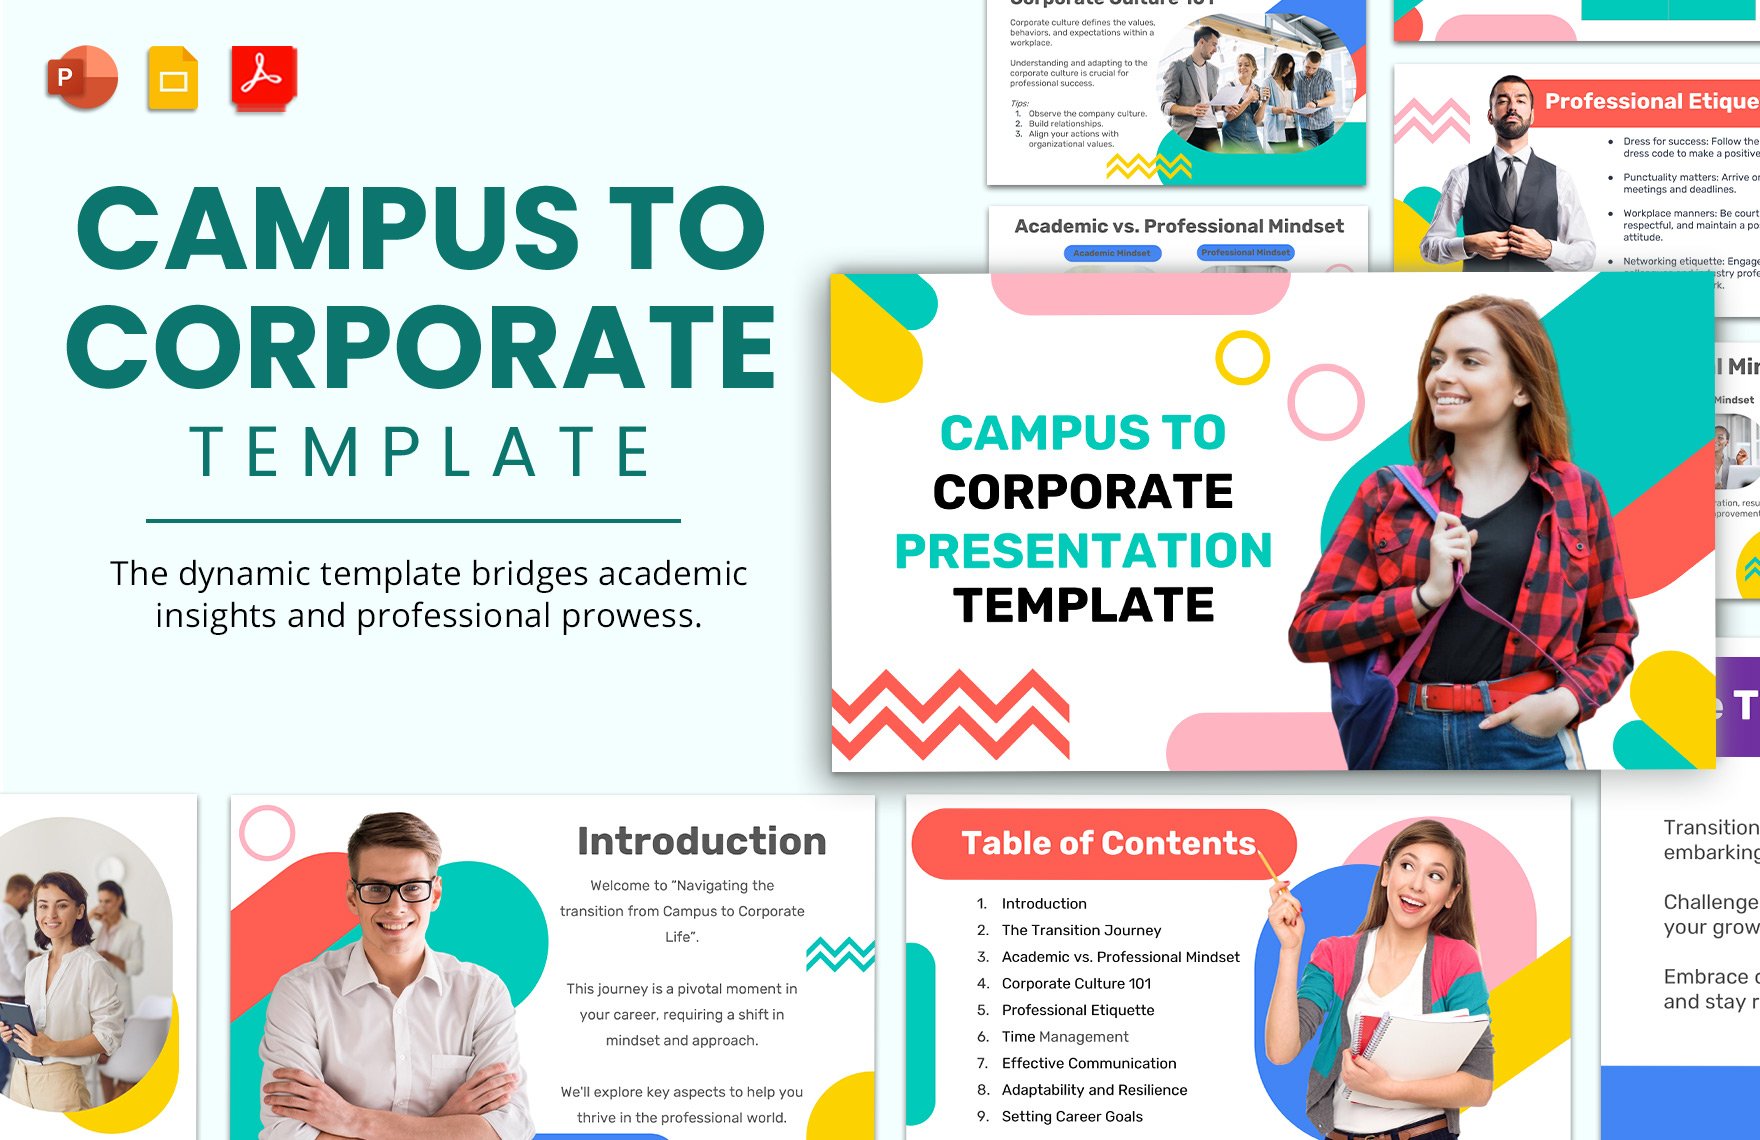 Campus to Corporate Template